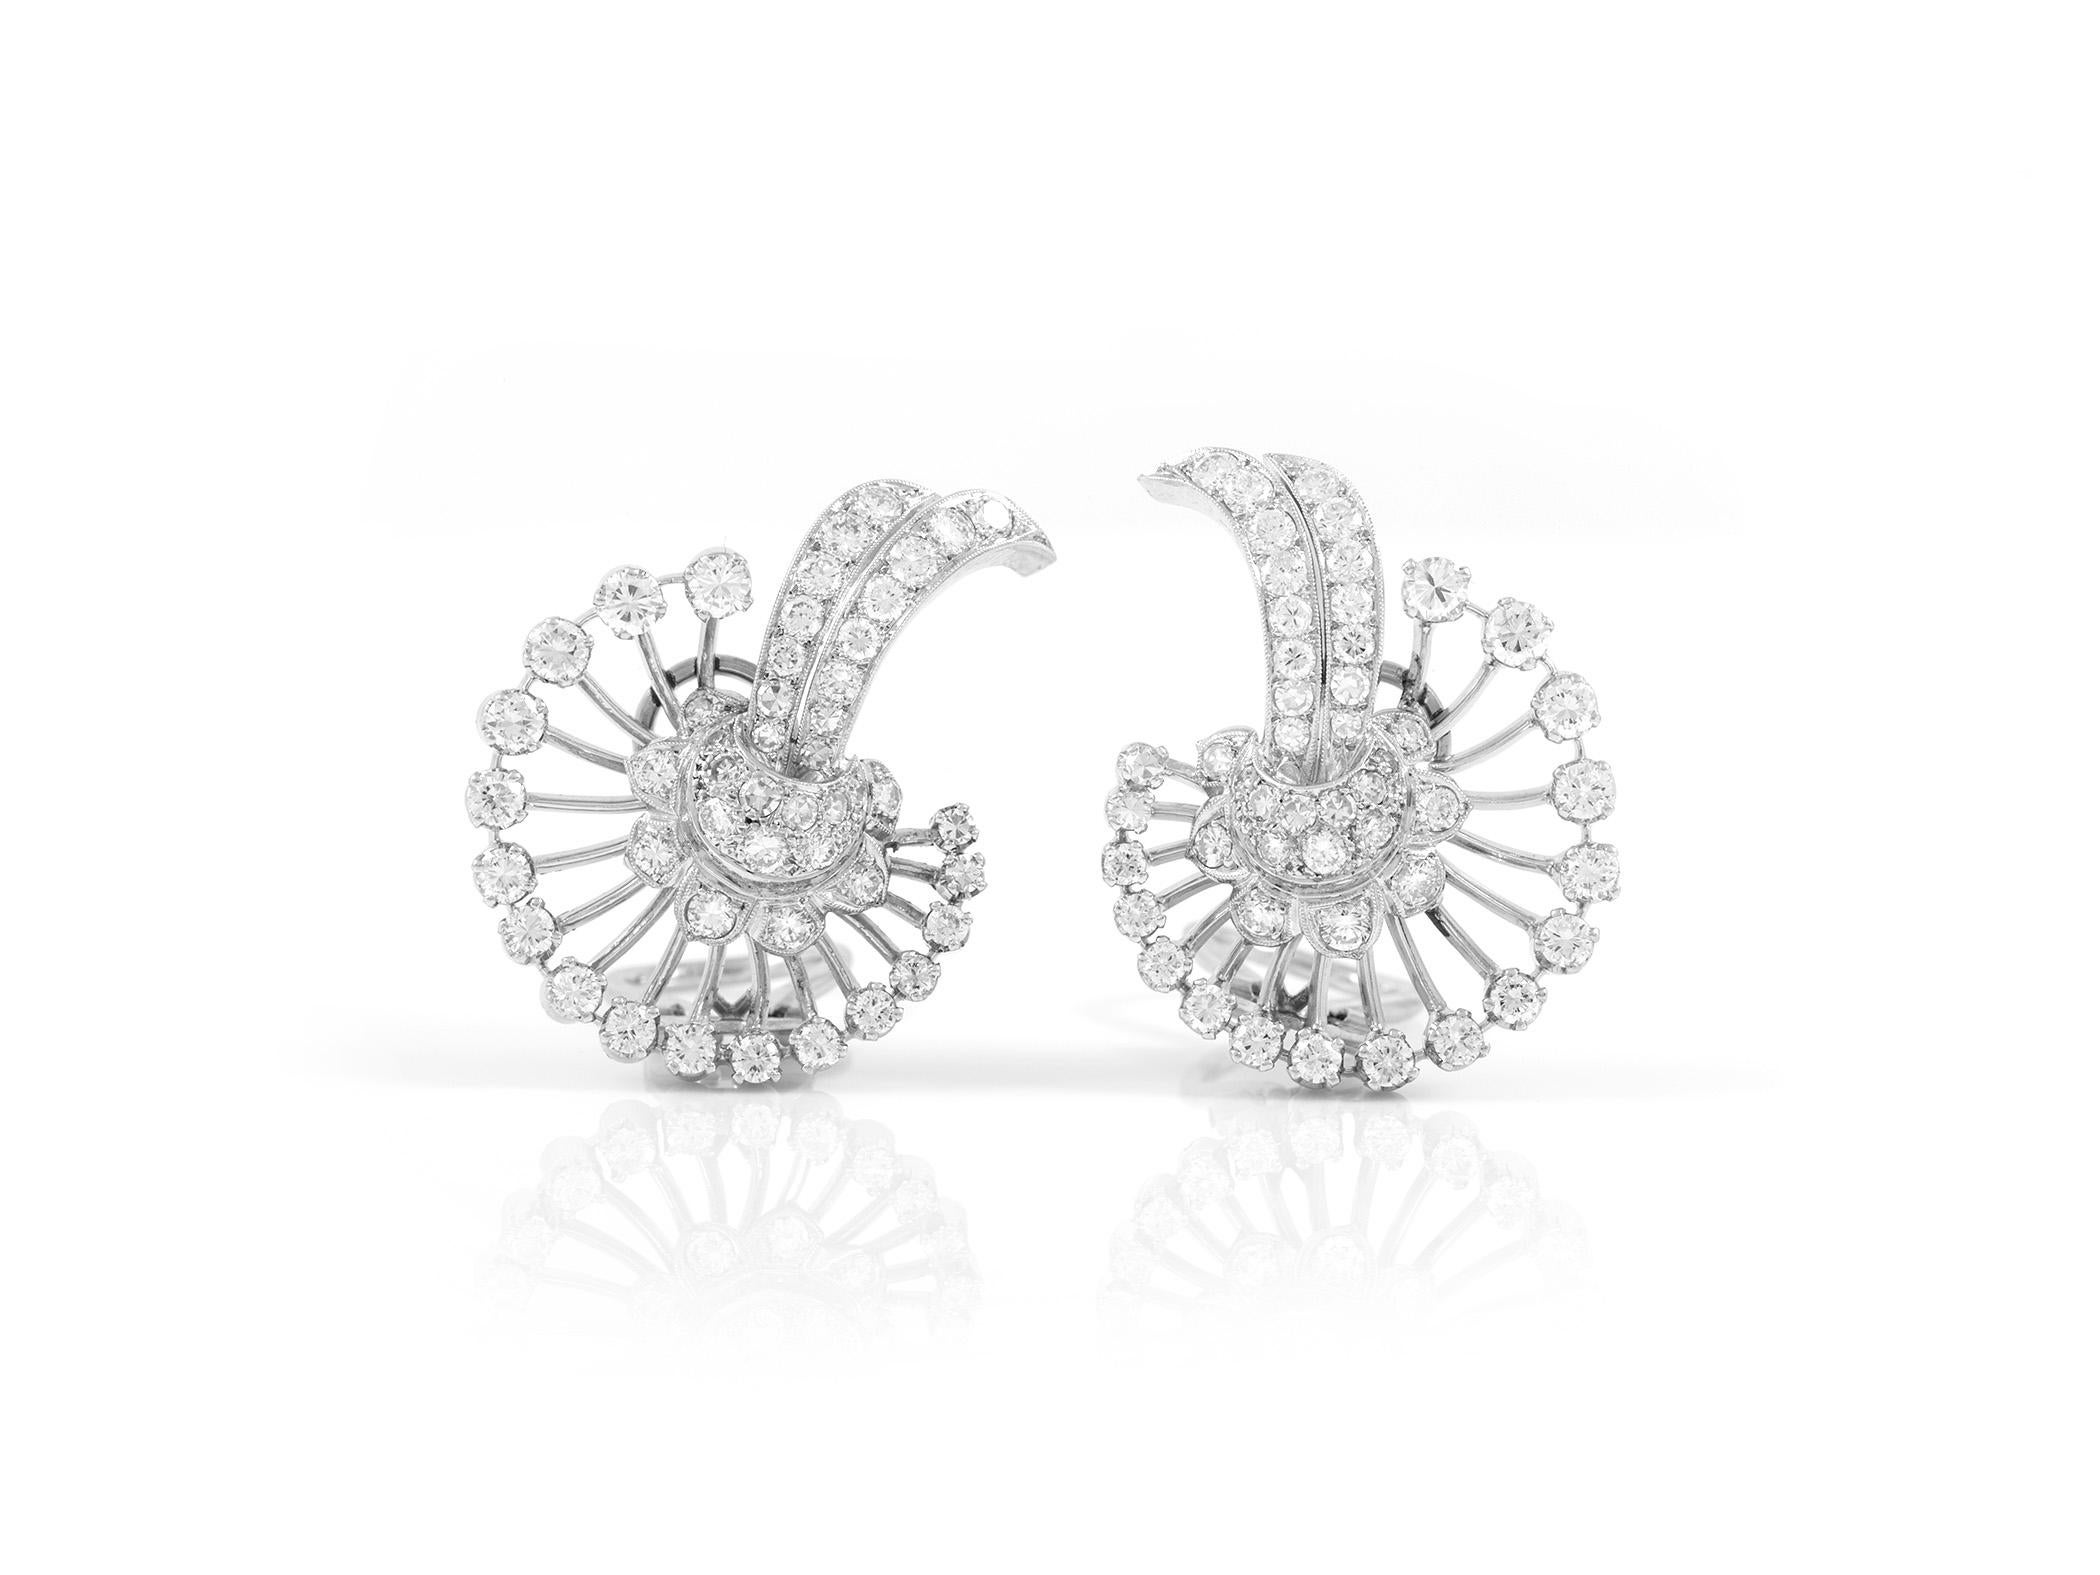 The earrings are finely crafted in platinum with diamonds weighing approximately total of 7.00 carat.